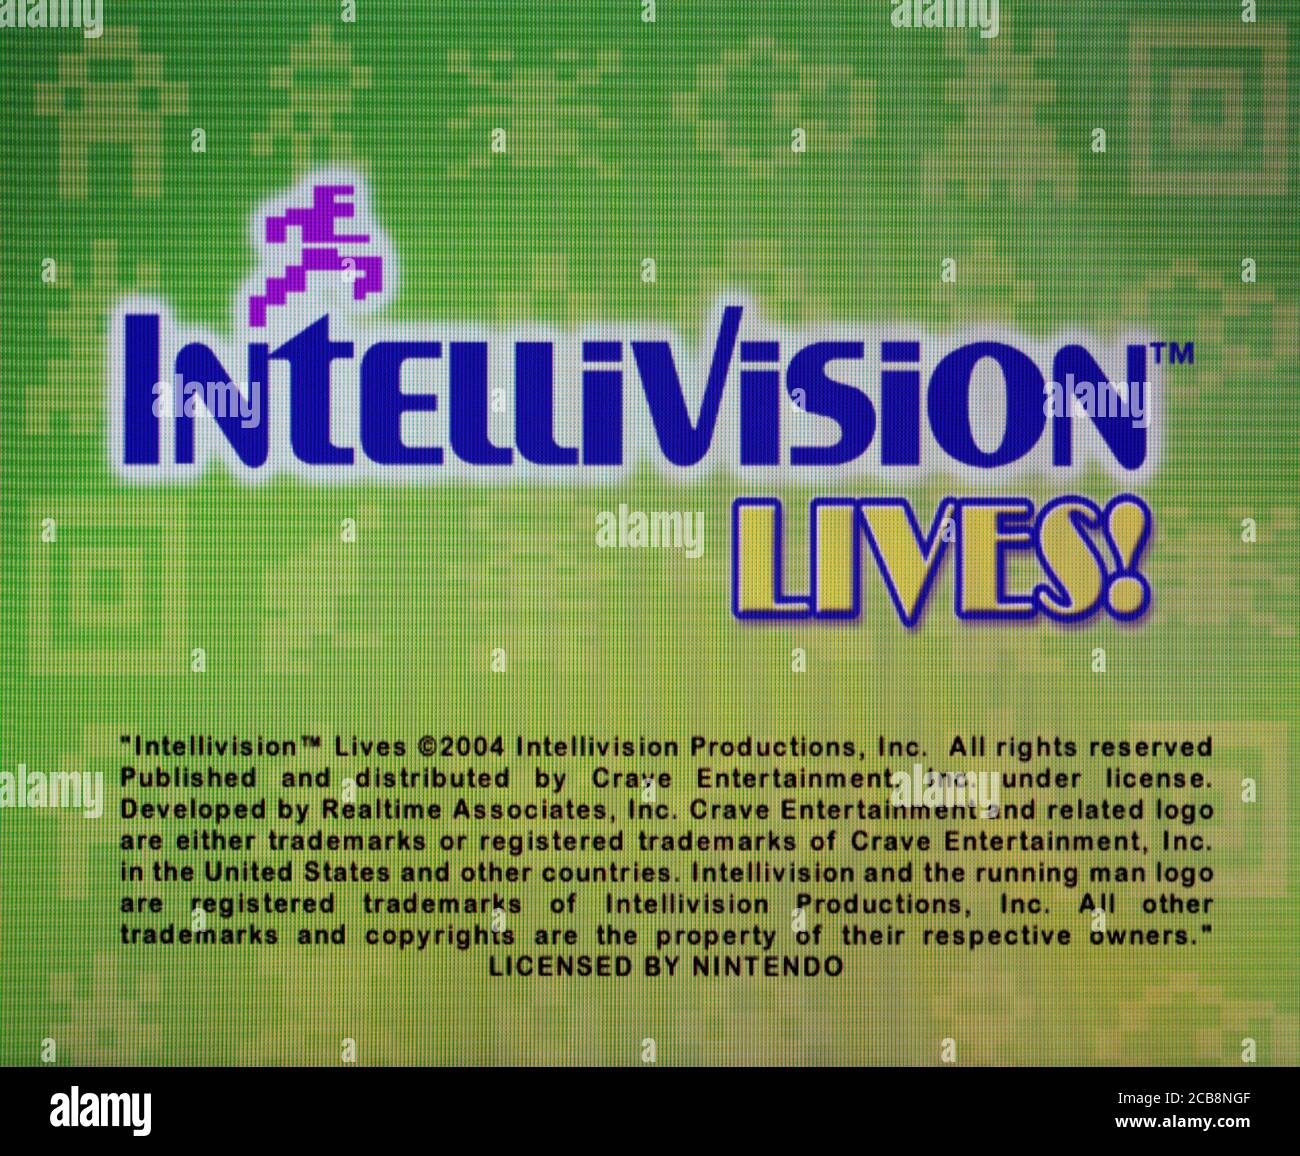 Intellivision Lives! - Nintendo Gamecube Videogame - Editorial use only Stock Photo